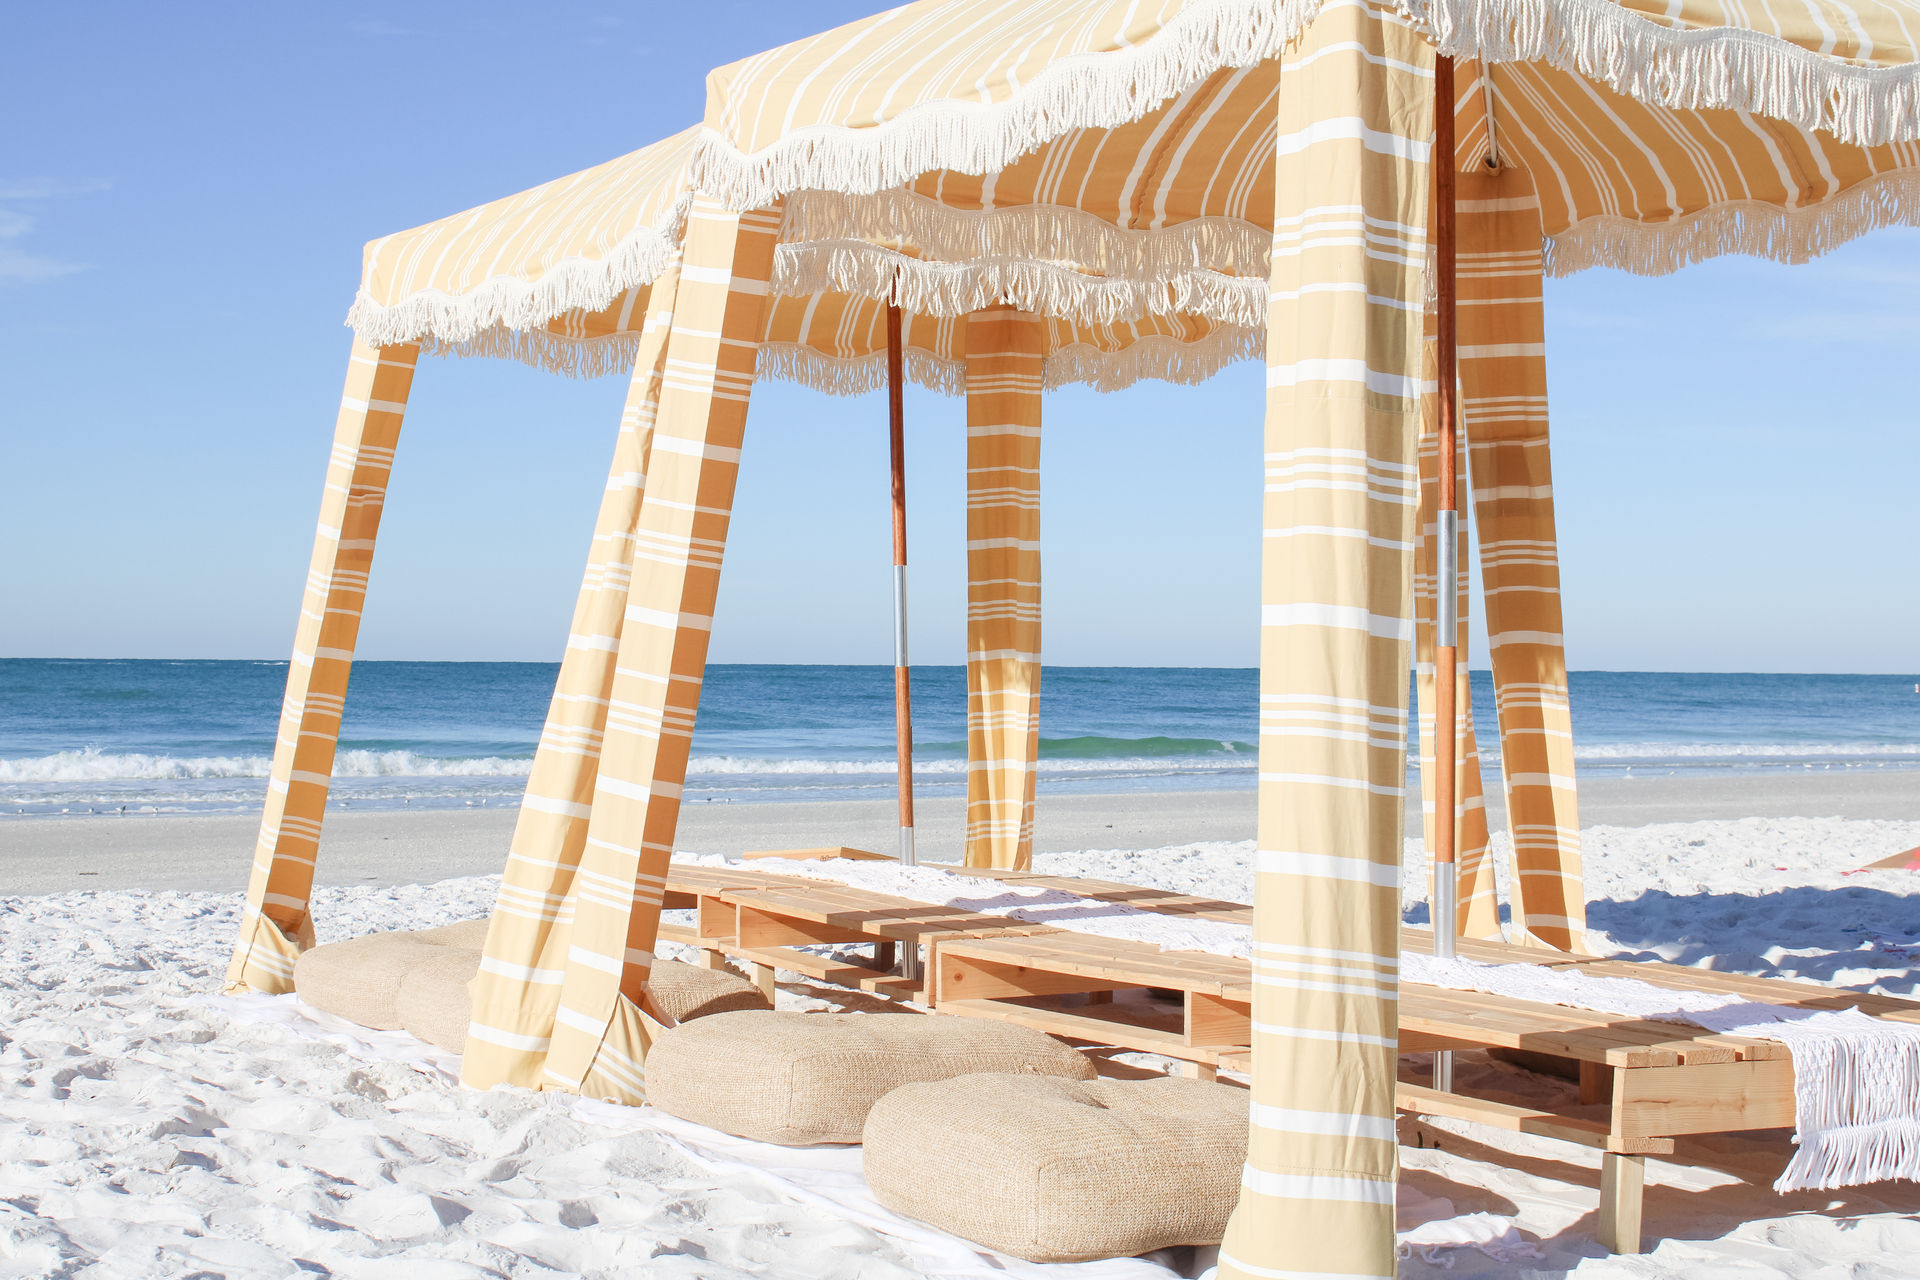 Luxury Beach Picnic Cabana Suite Setup with Custom Decor, Games, Coolers & More (BYOB) image 2